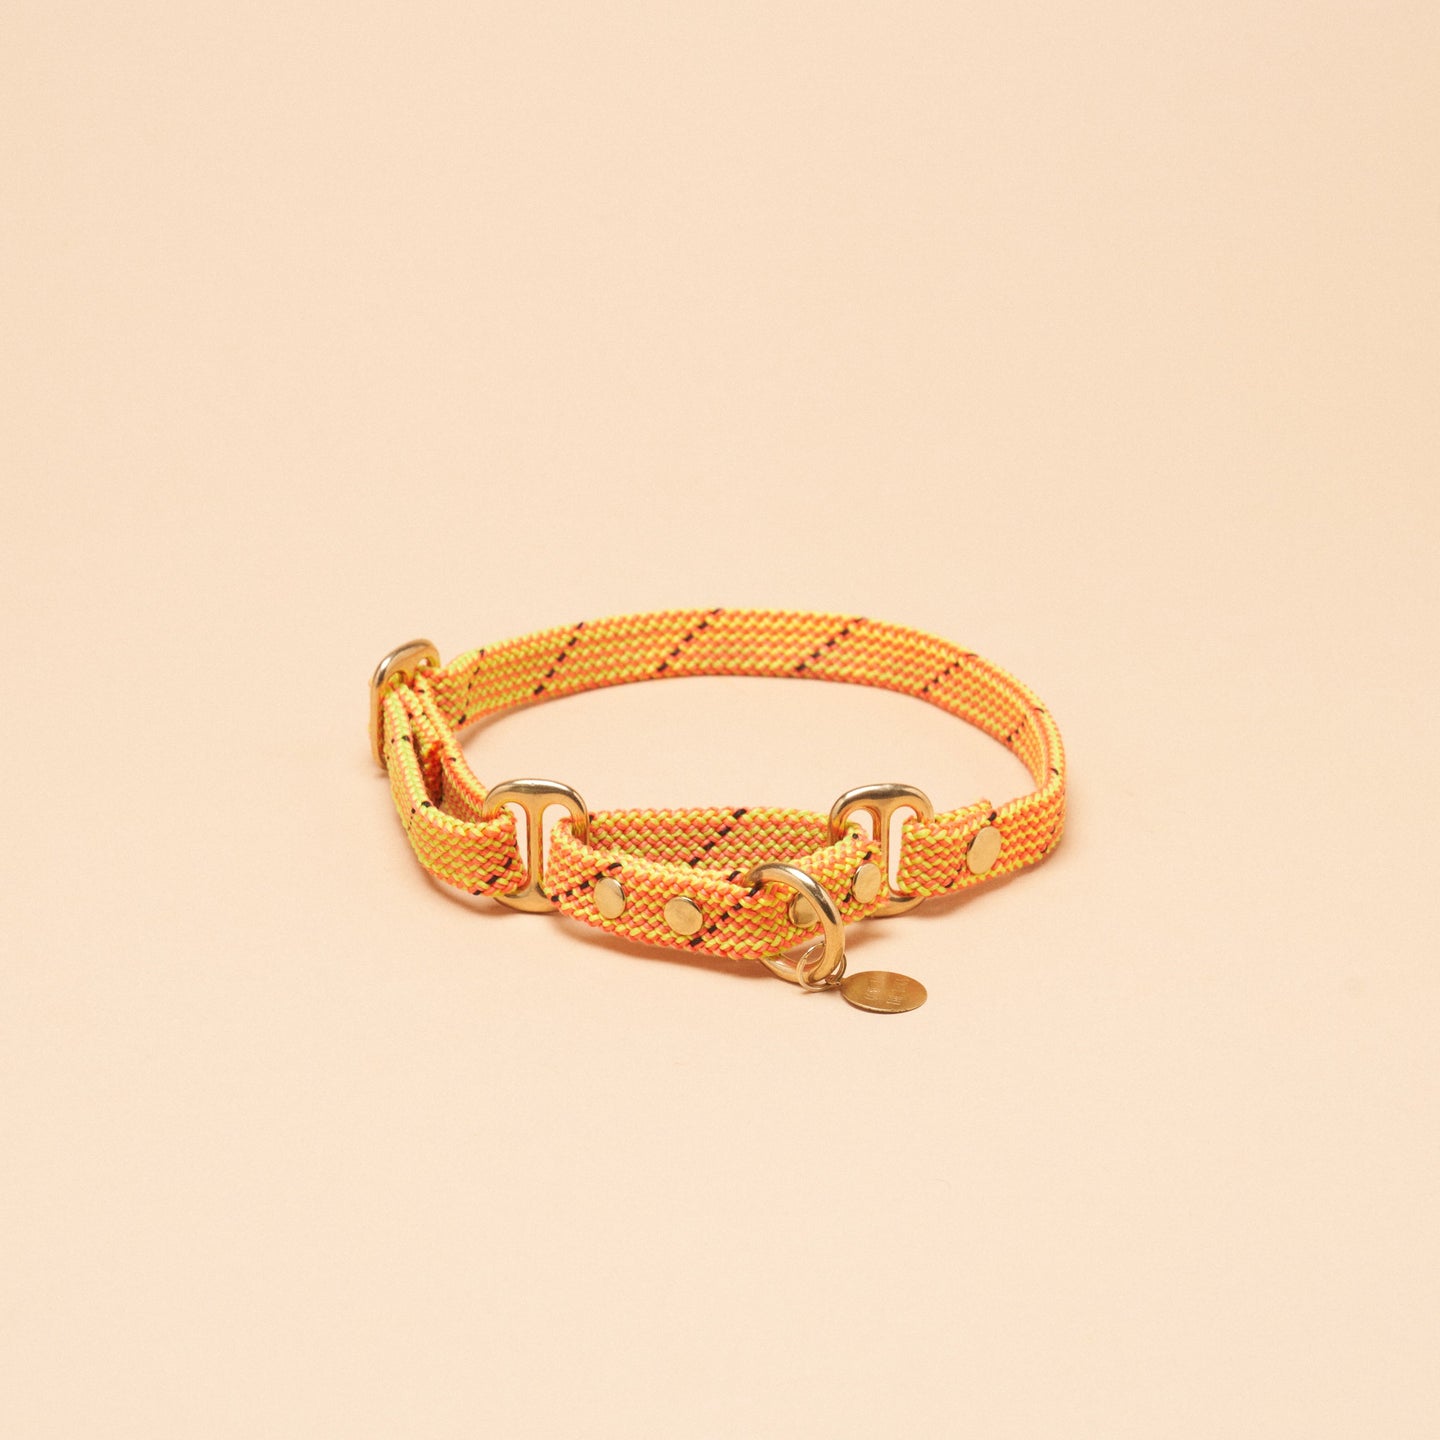 Remy Martingale Collar - Turbo Yellow